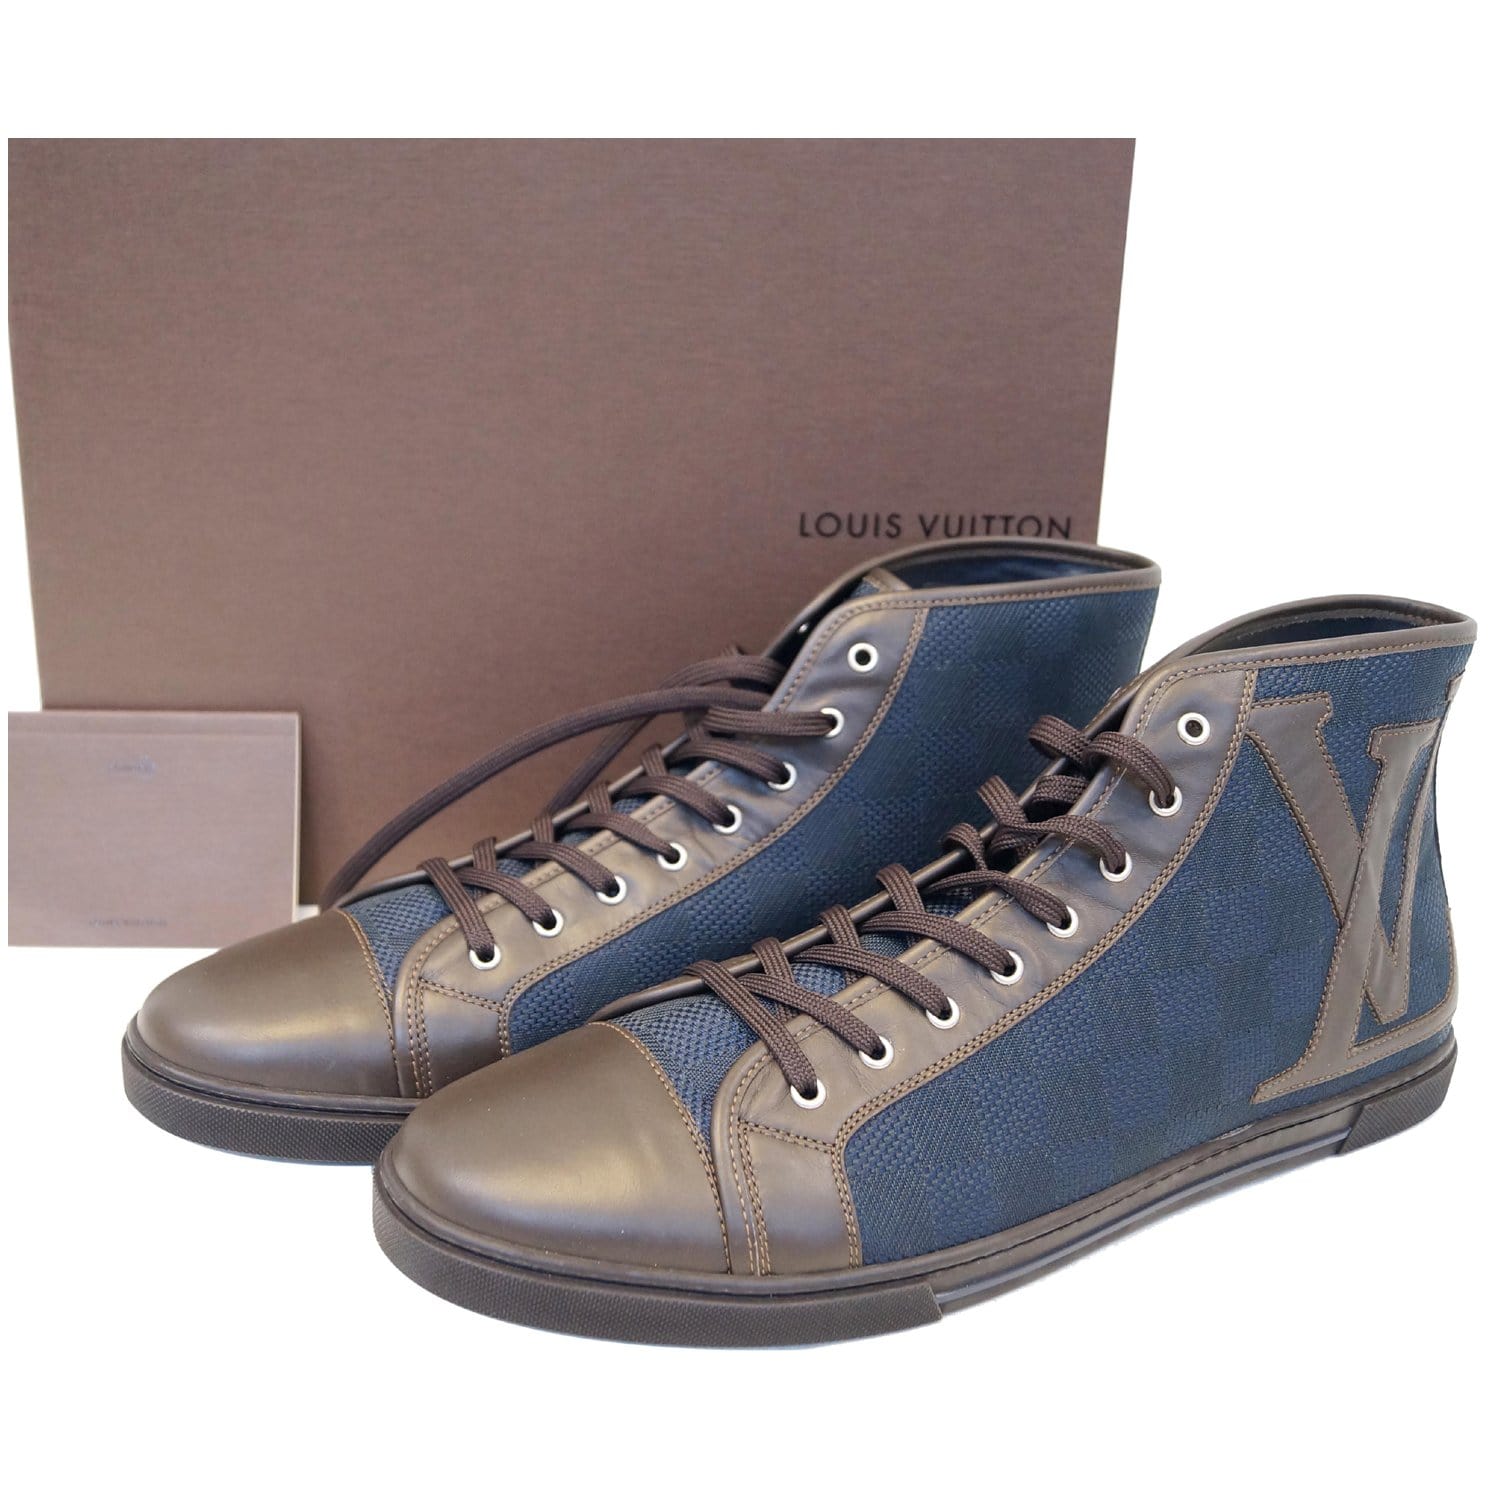 Louis Vuitton Navy Blue/Brown Denim and Leather High Top Sneakers